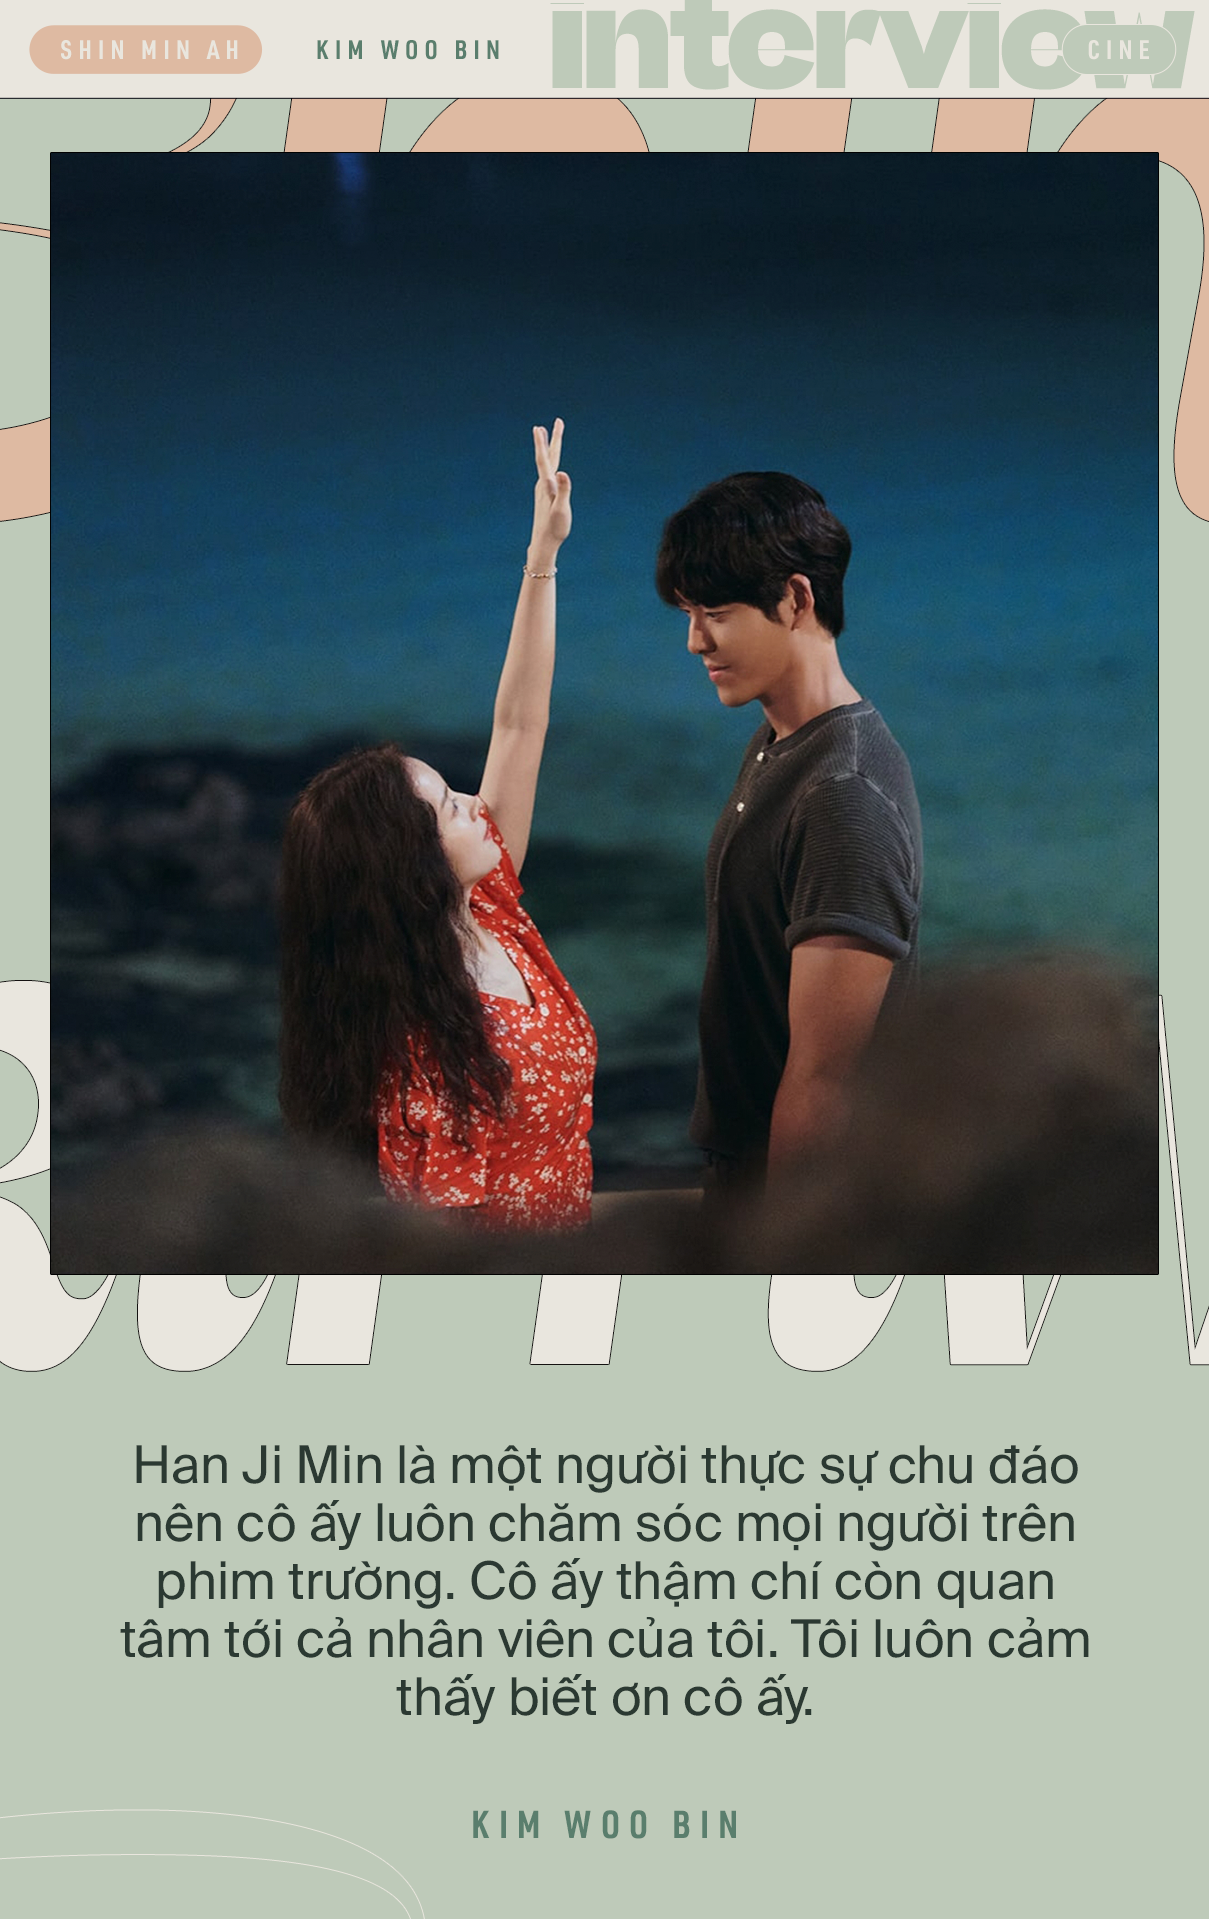 Interview with Shin Min Ah - Kim Woo Bin: Happiness is living with the person you love without any obstacles - Photo 5.